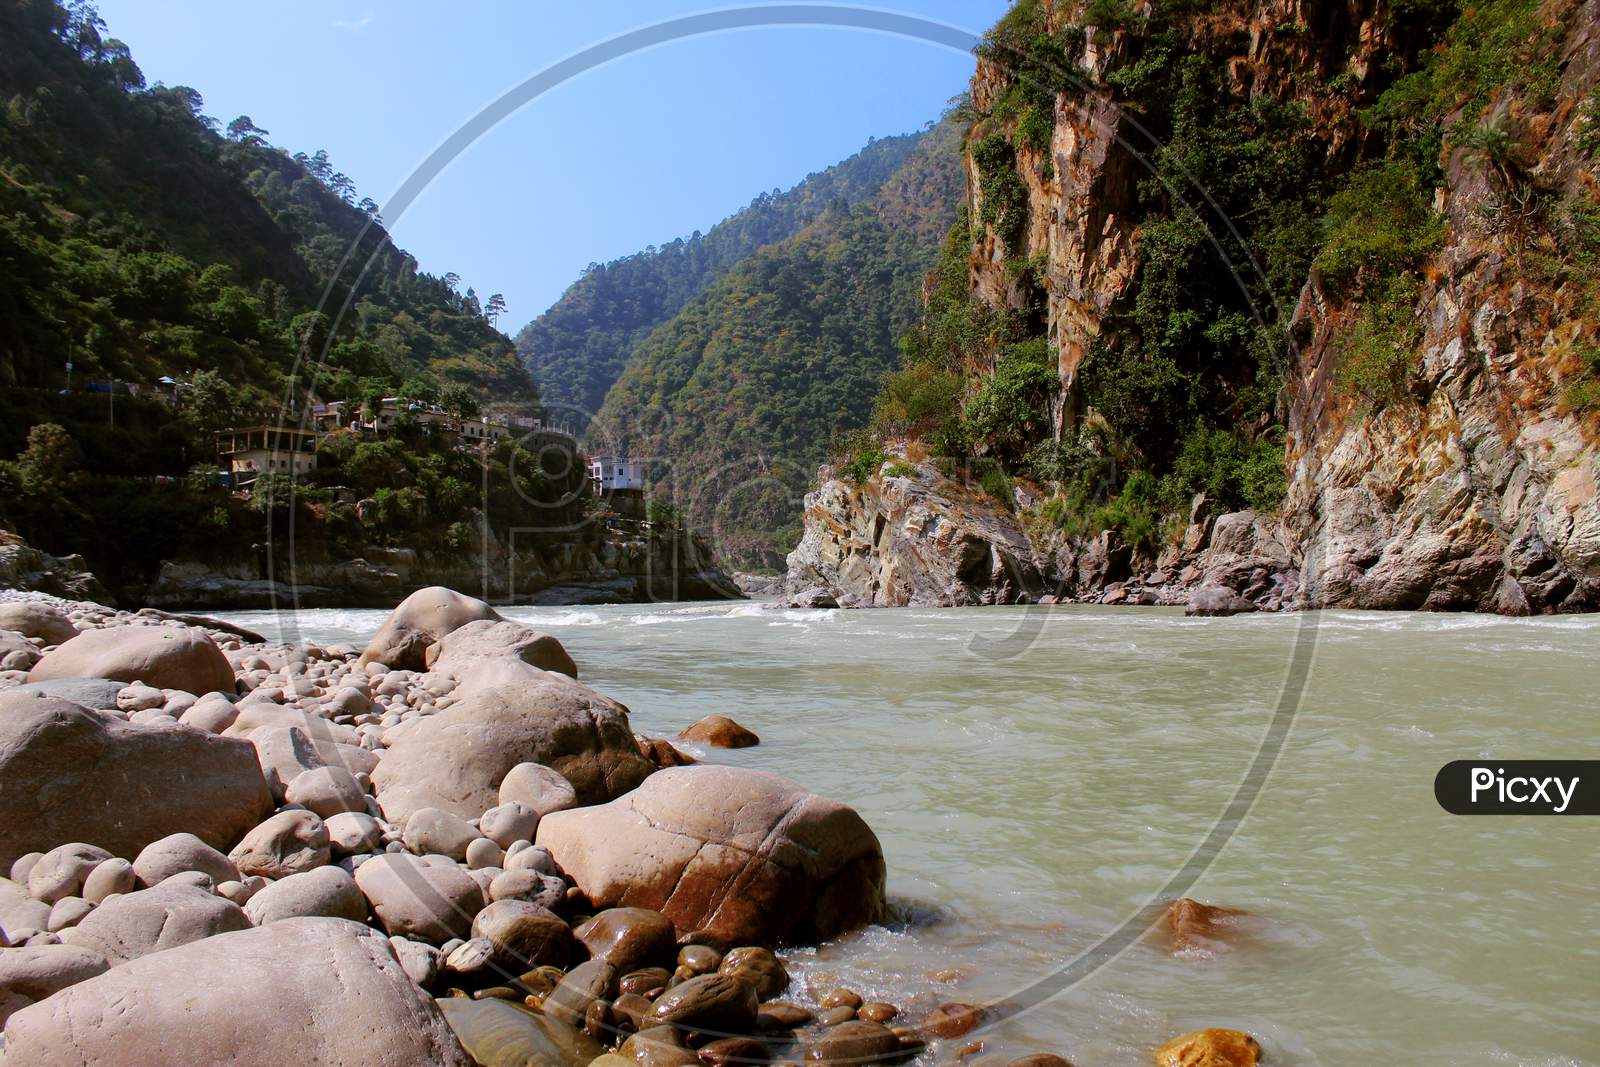 Landscape with mountains, forest and pines, river and blue sky & stones on riverside.